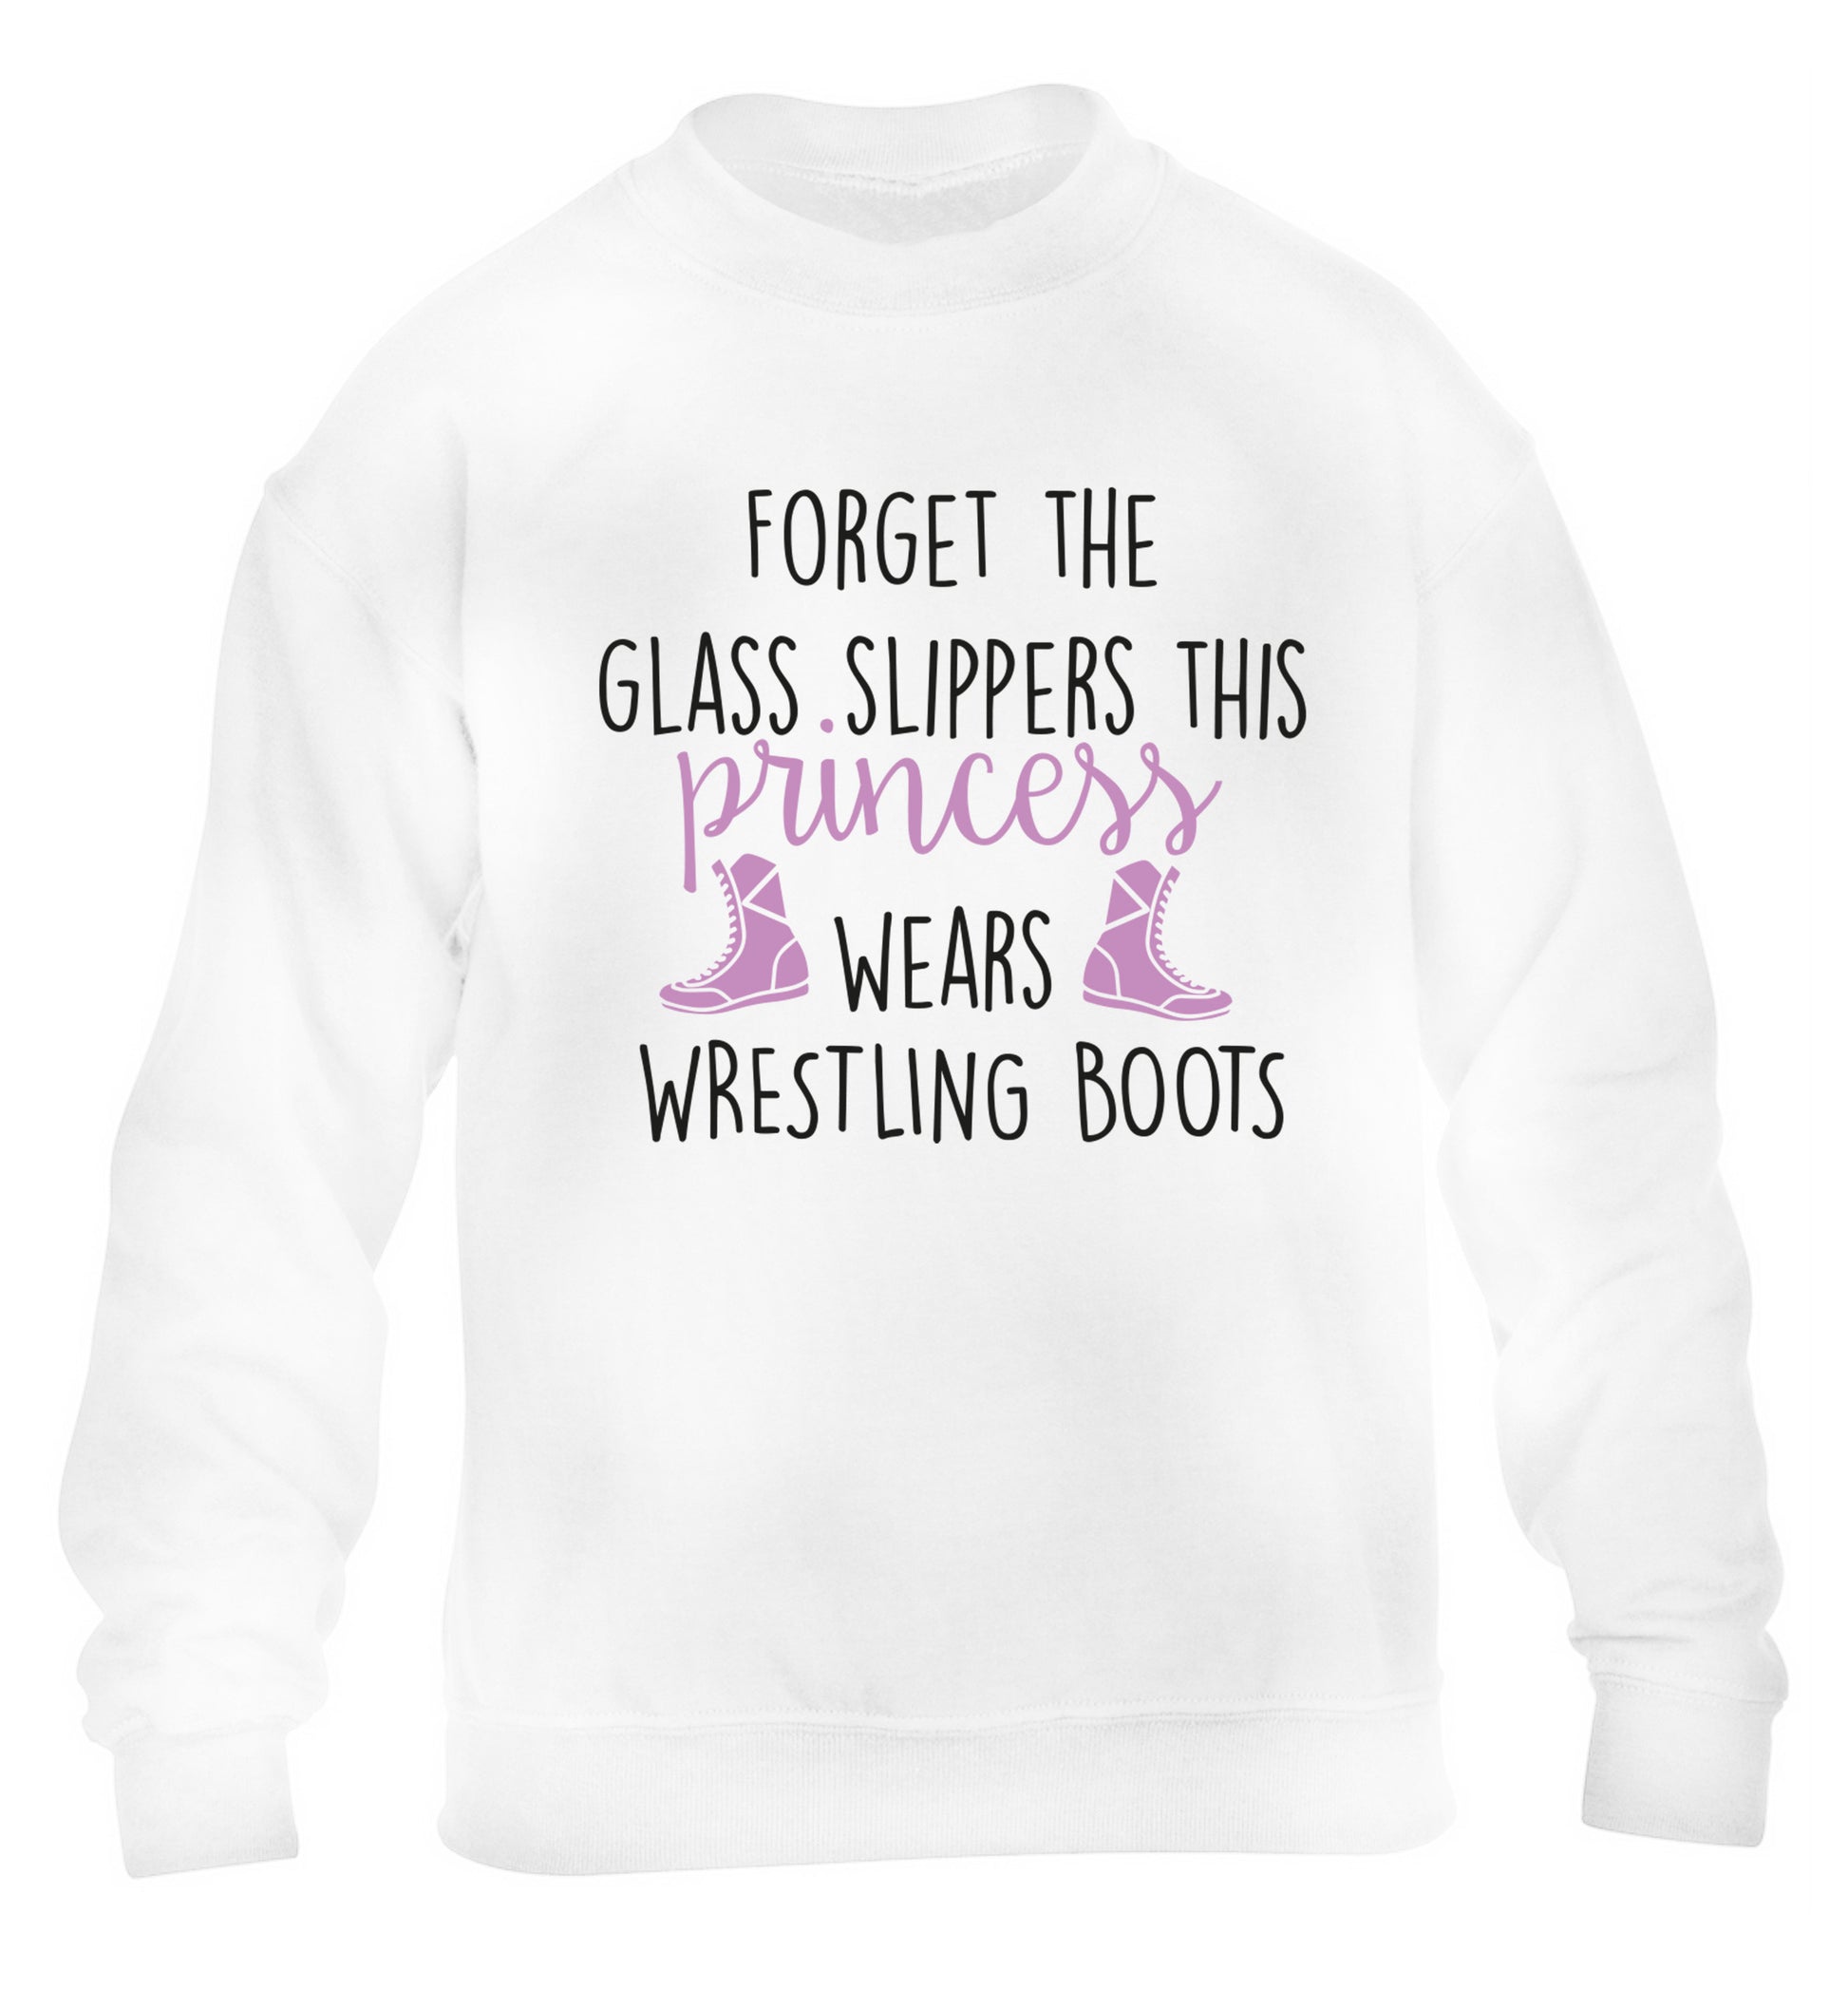 Forget the glass slippers this princess wears wrestling boots children's white sweater 12-14 Years